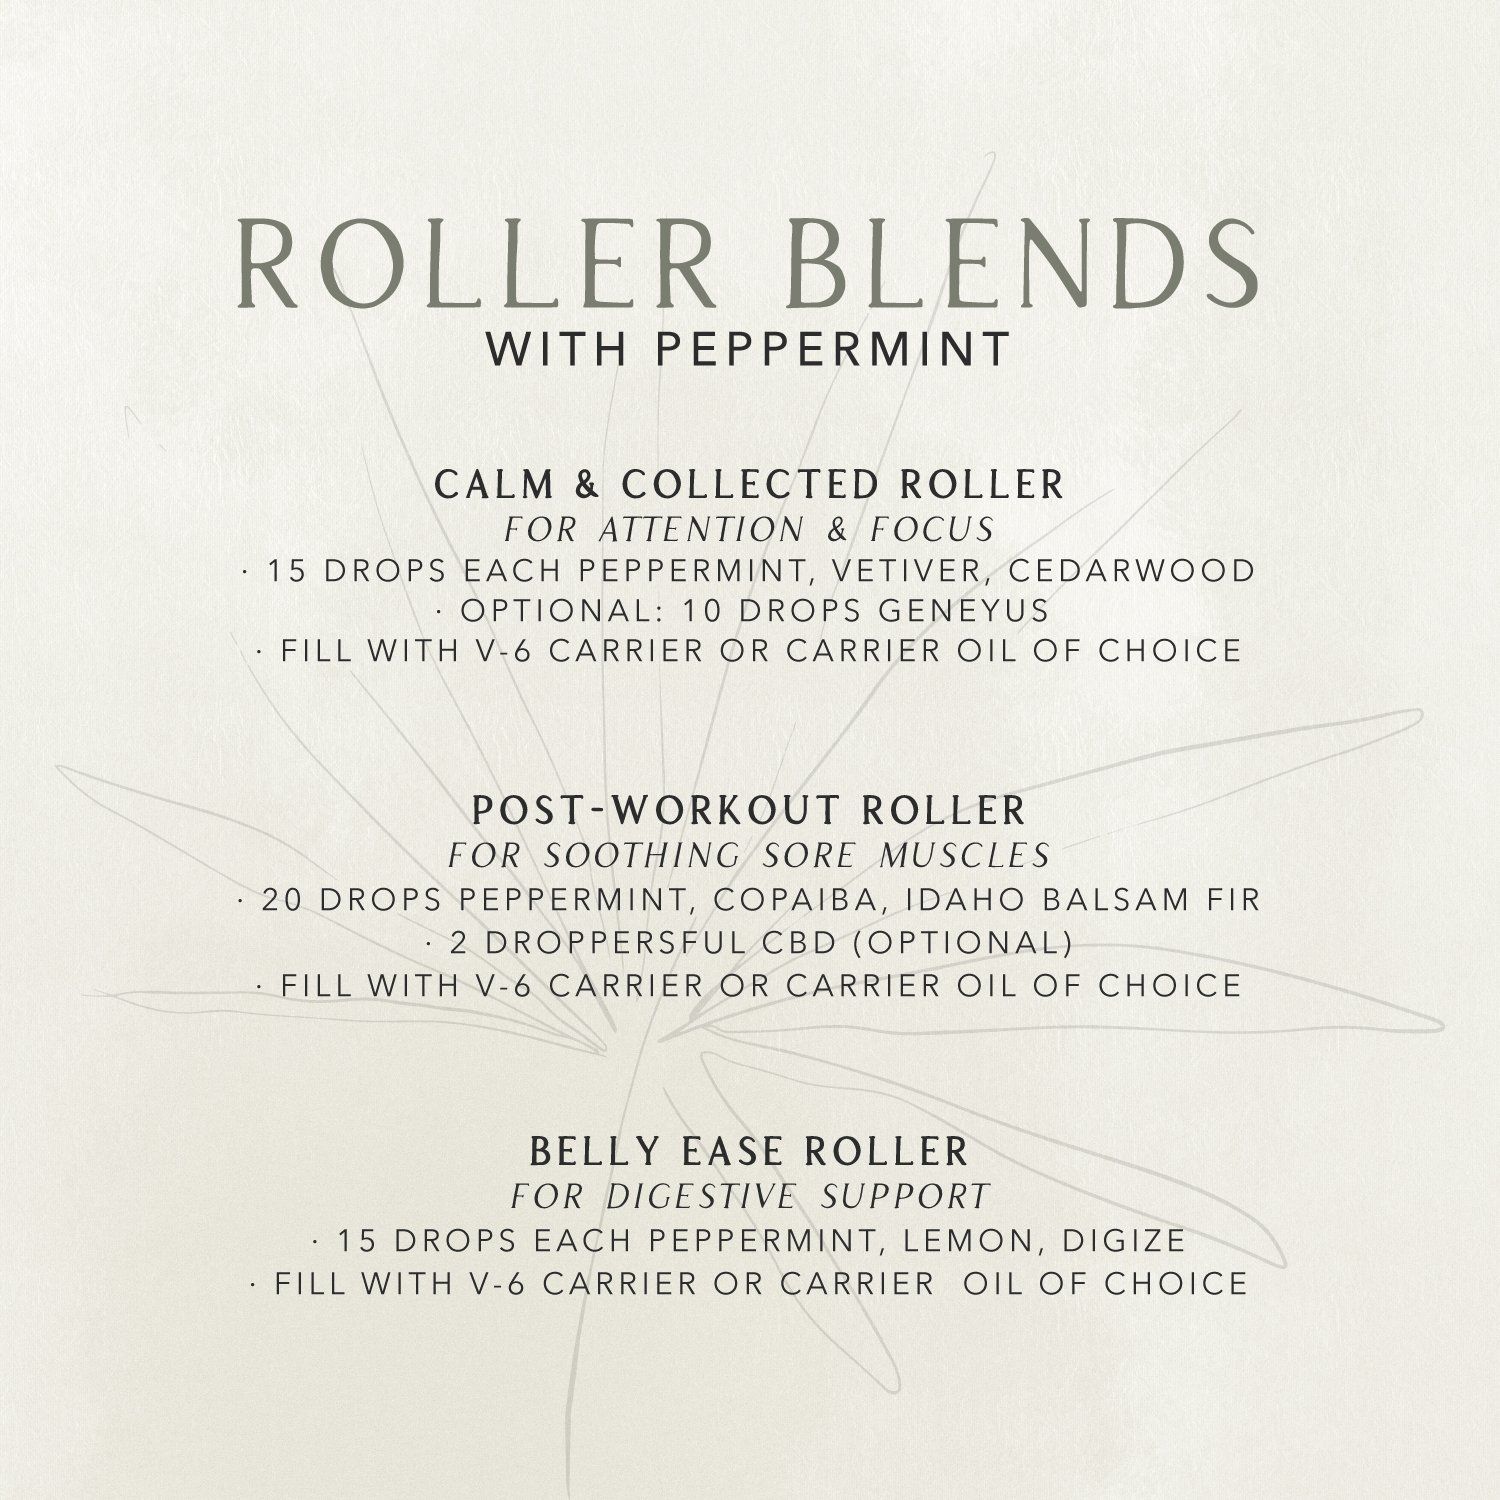 Roller Blends with Peppermint